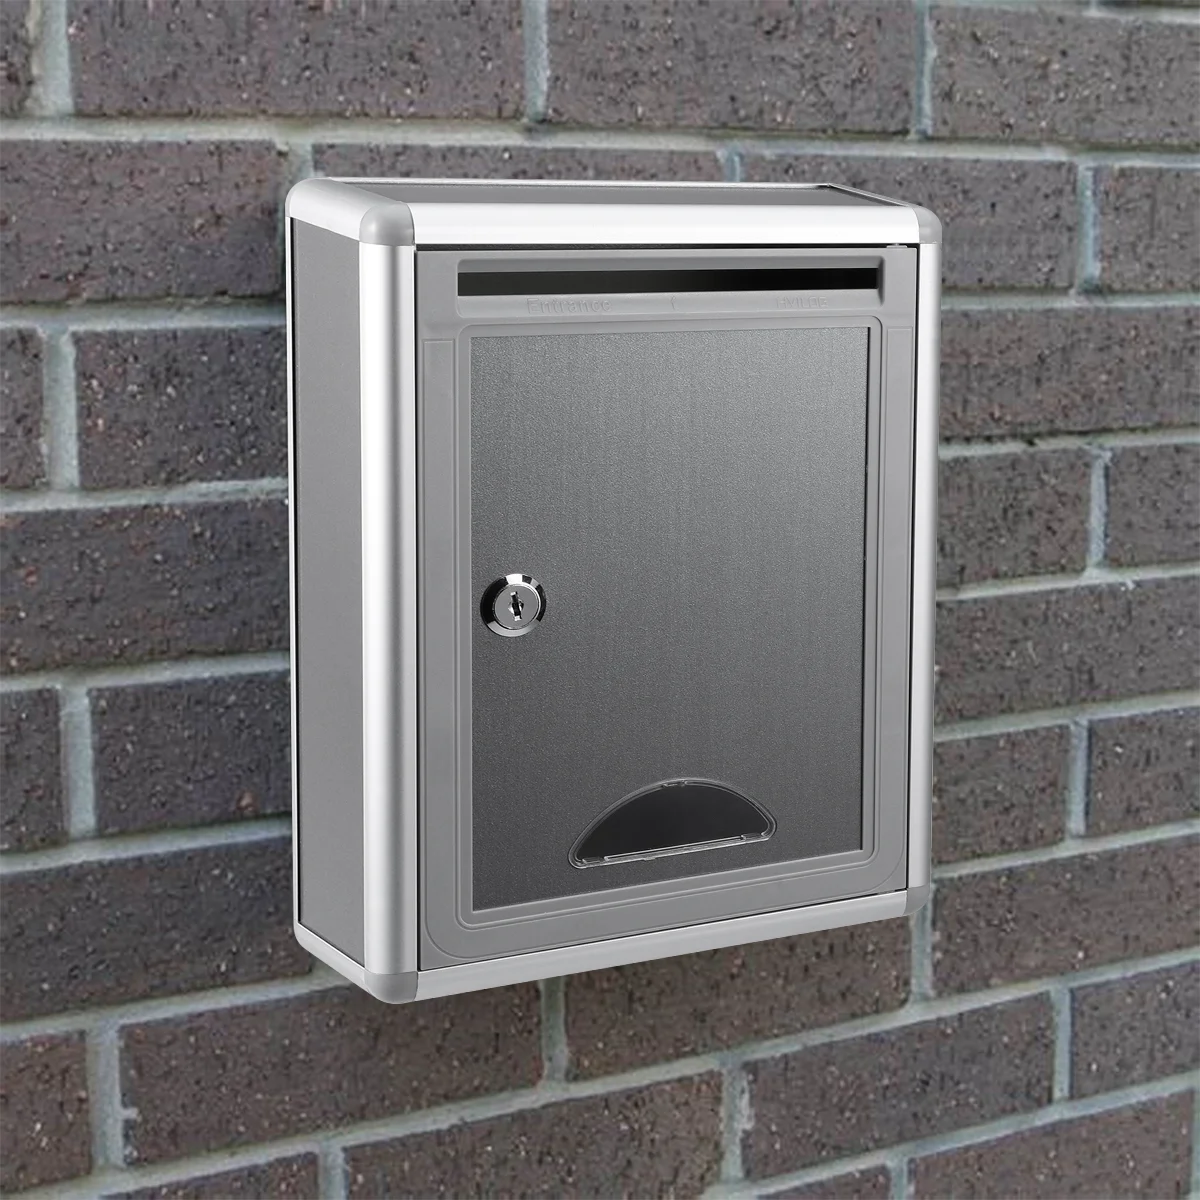 

Box Suggestion Wall Mailbox Drop Lockmounted Locking Mail Donation Boxesmetal Post Hanging Ballot Mount Letter Steel Stainless